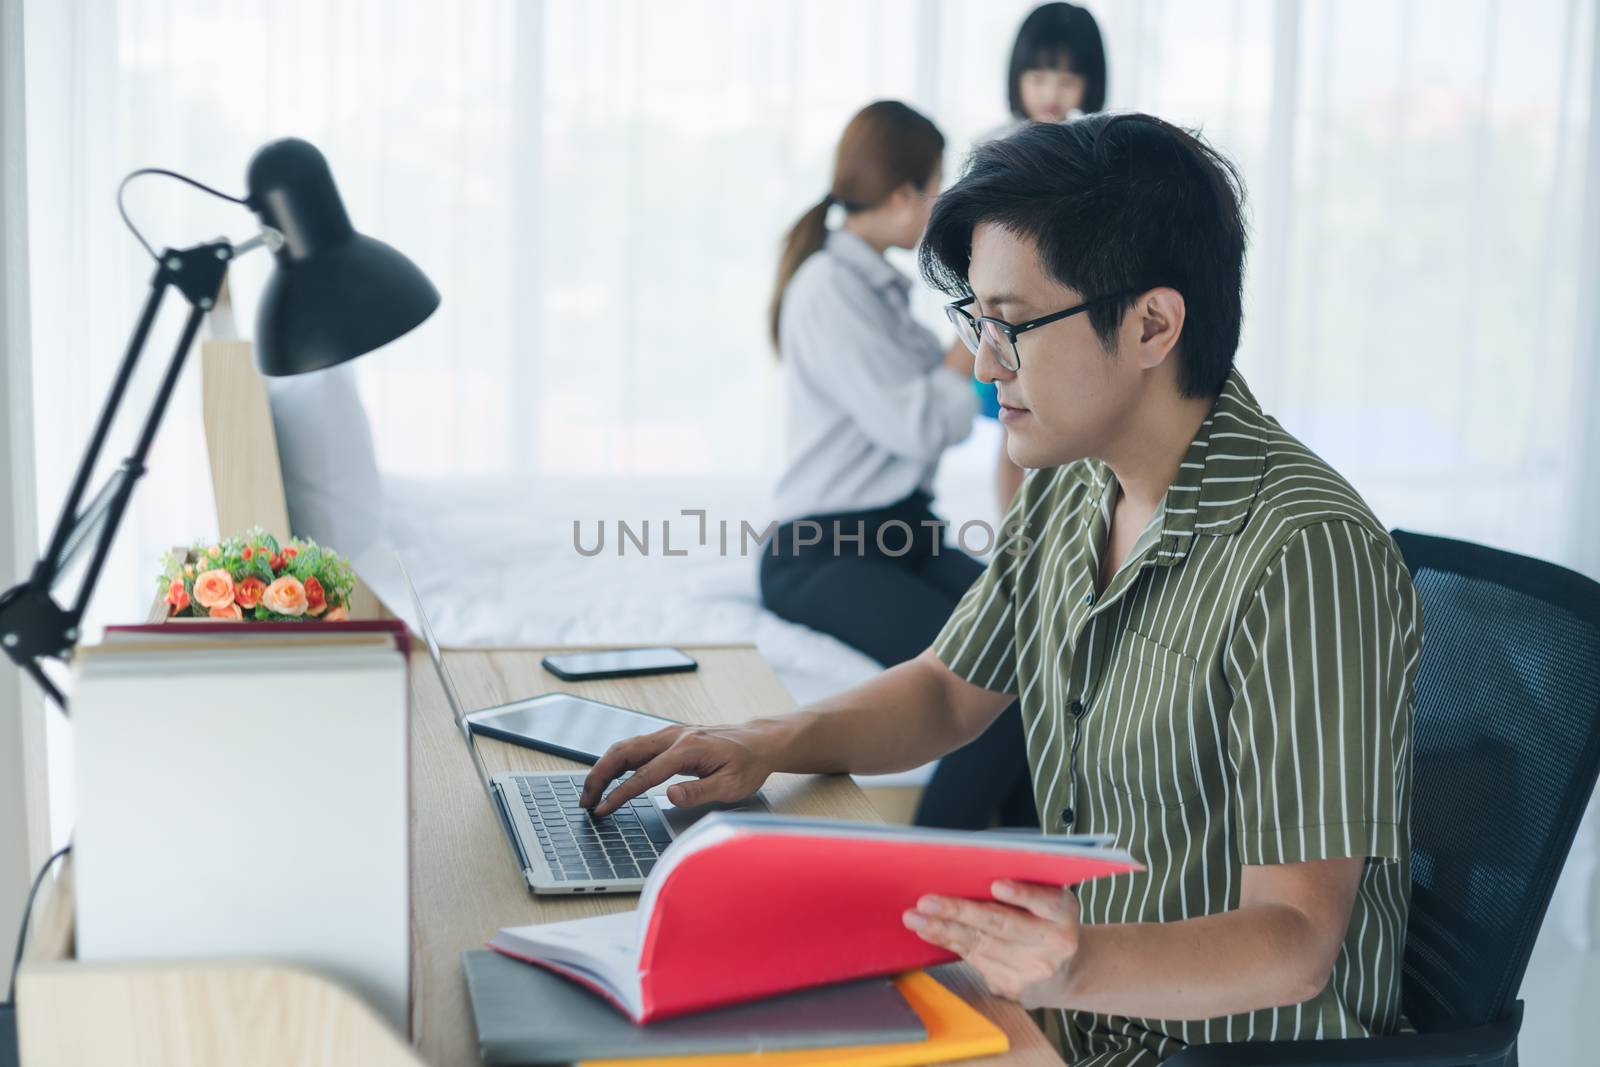 Work  from home - Concept. Photos of Asian families consisting of parents and daughters. Parents working at home and raising children as well. The little daughter who is playing mischievously